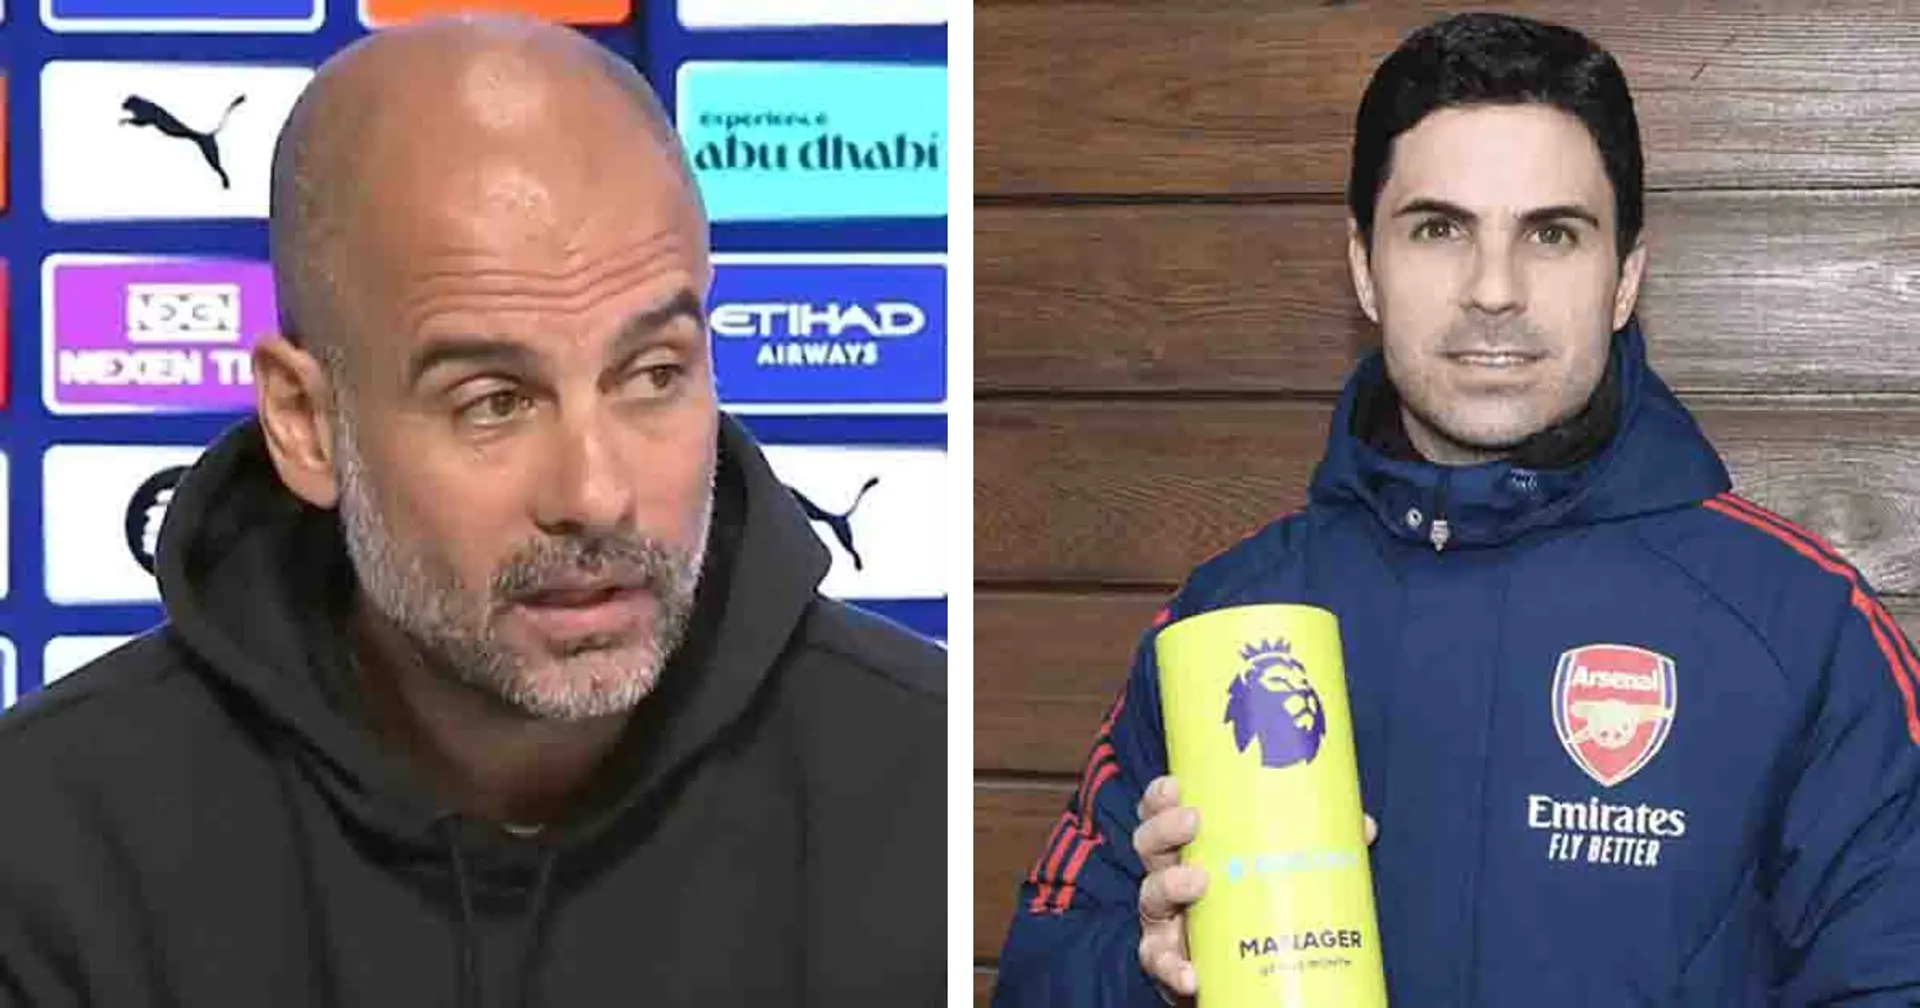 ‘I'd love to be in their position than have won 4 PL titles’: Guardiola continues mind games with Arsenal